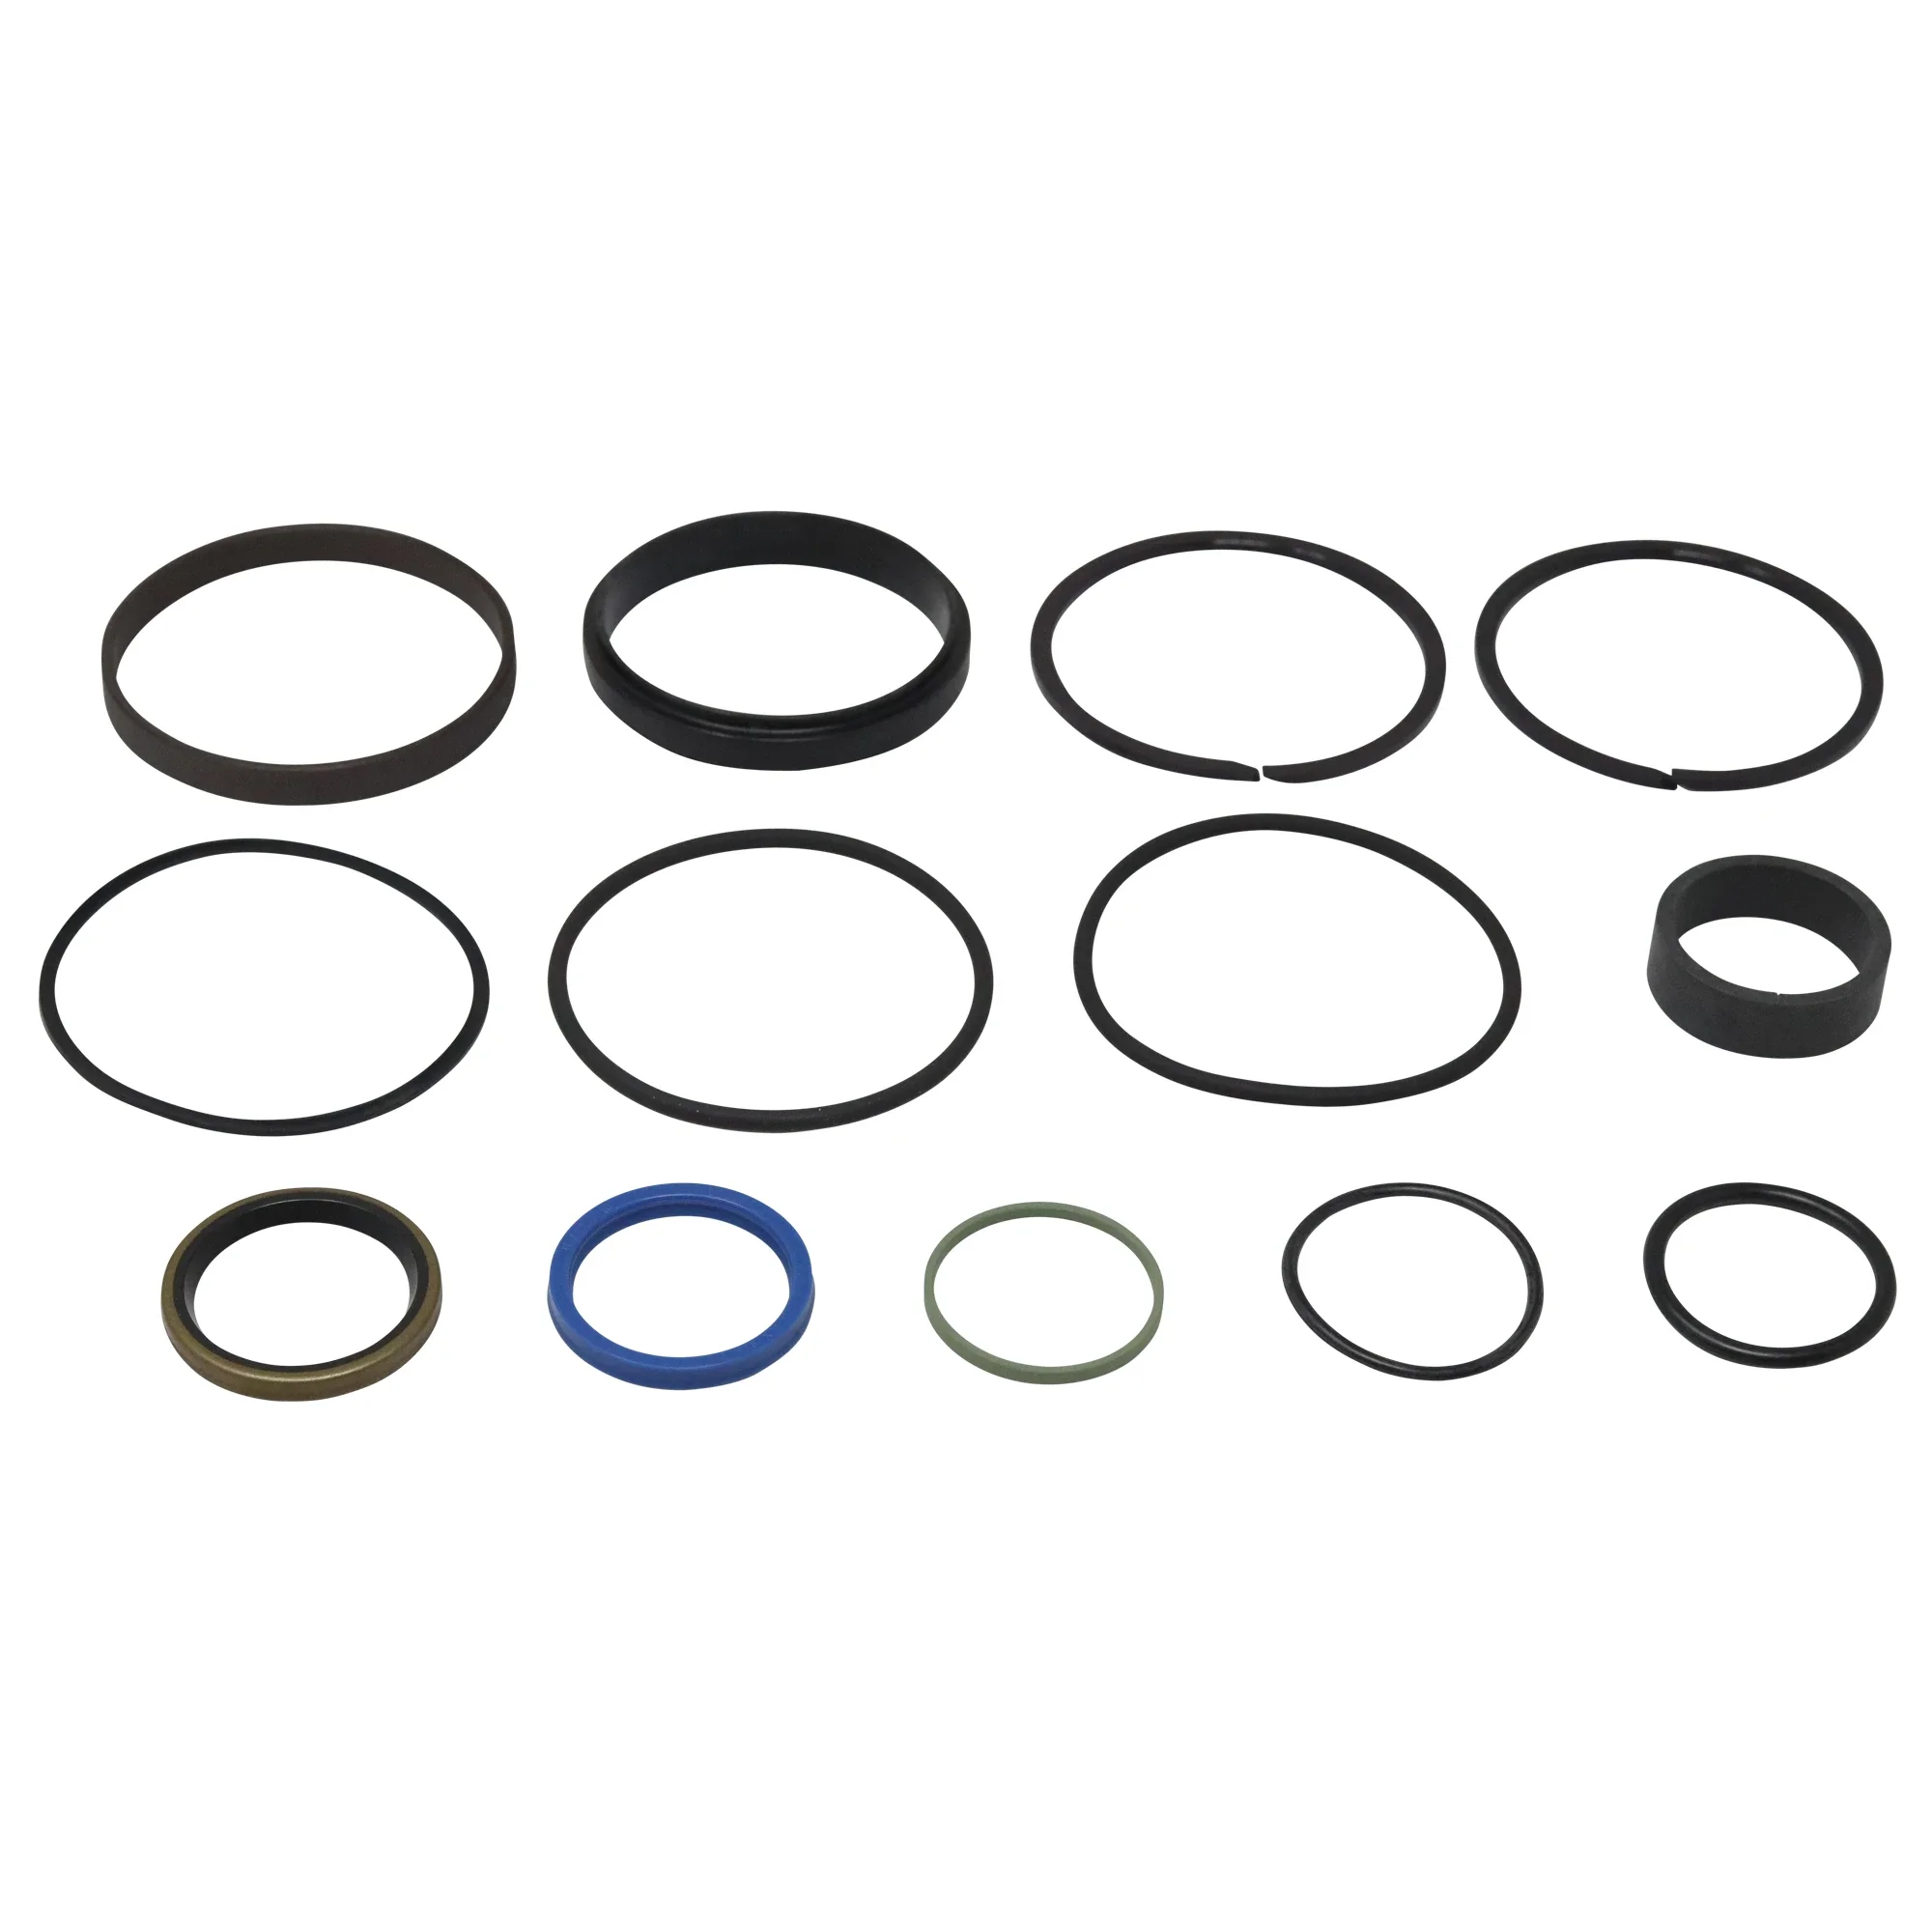 Wastebuilt® Replacement for Heil Seal Kit for H1-001-6973/6974 Cylinder